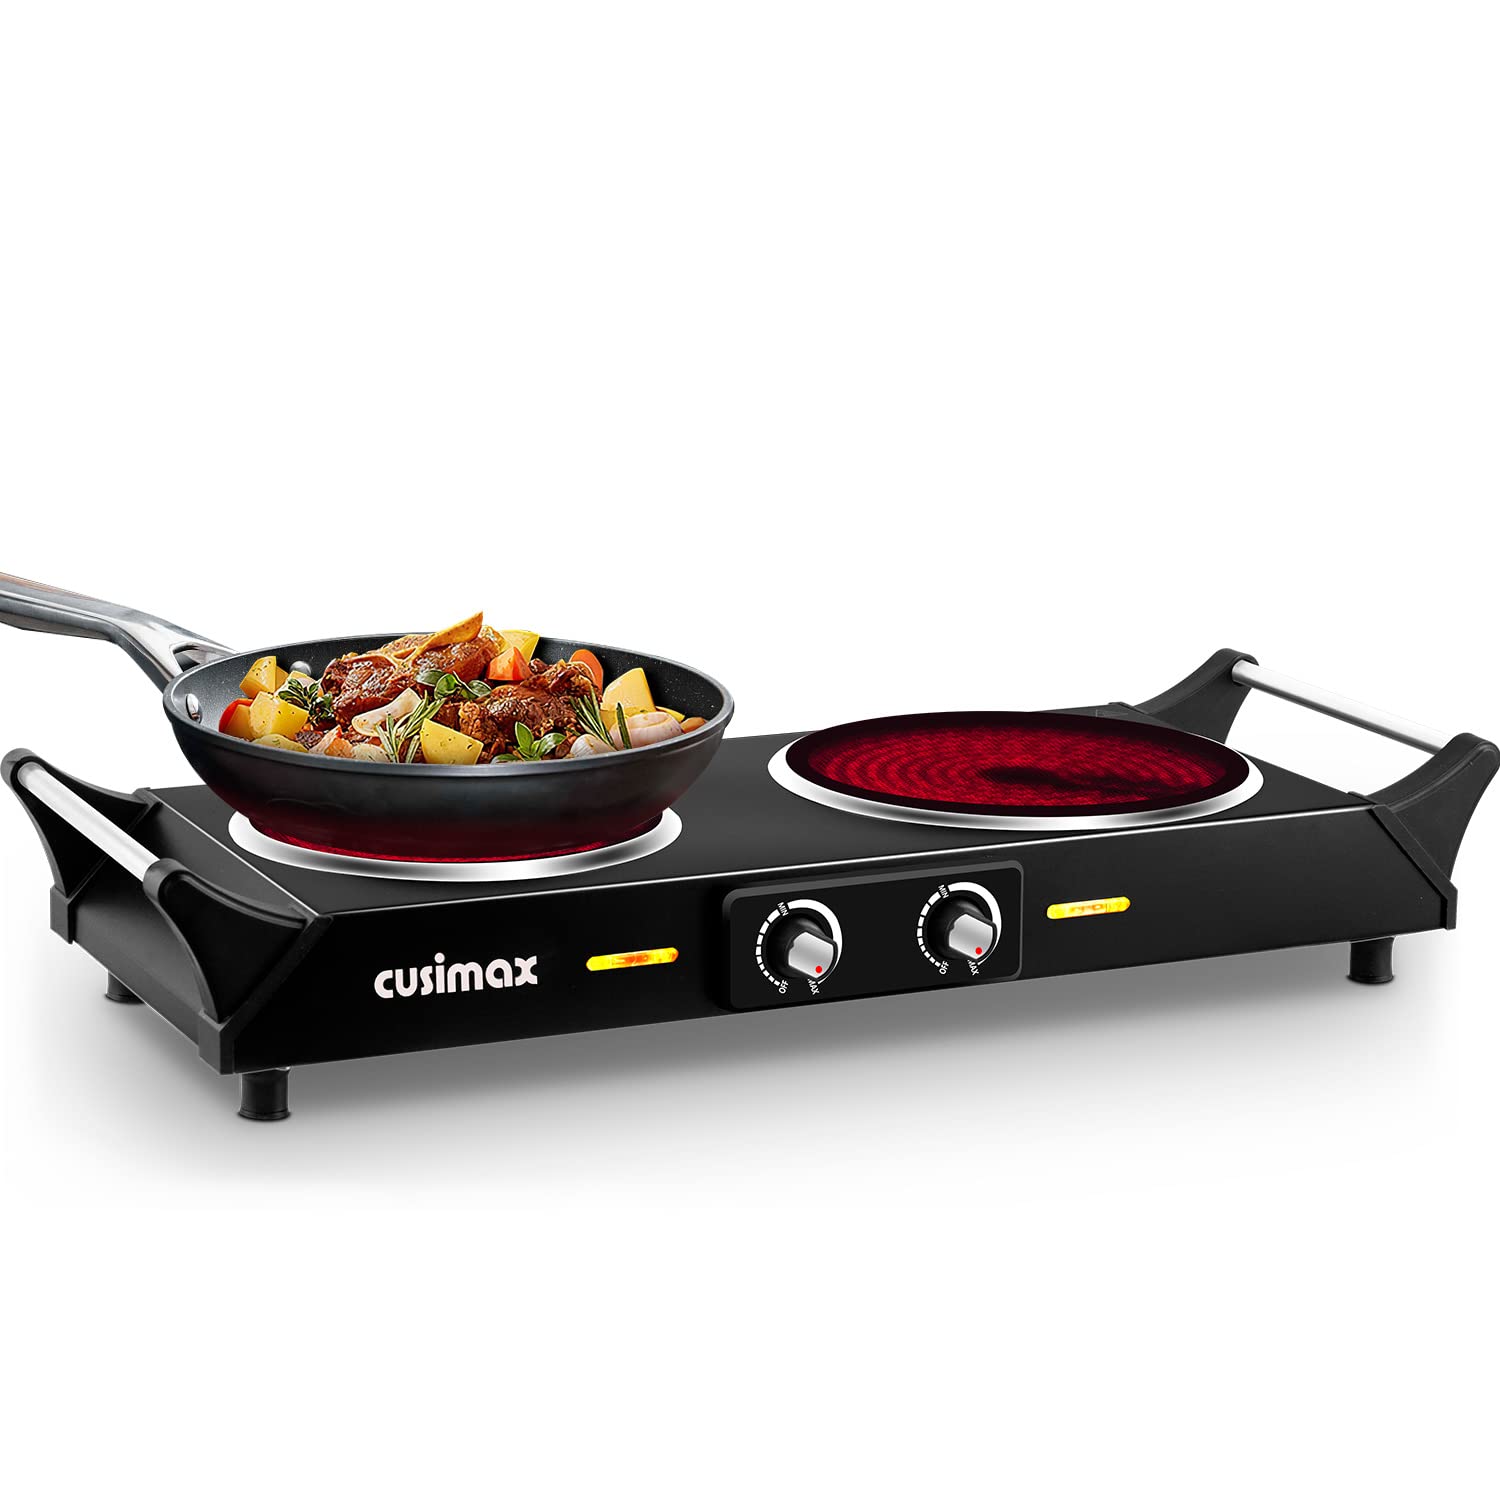 Cusimax 2100W Portable Ceramic Dual Hot Plate with Handle(UK)